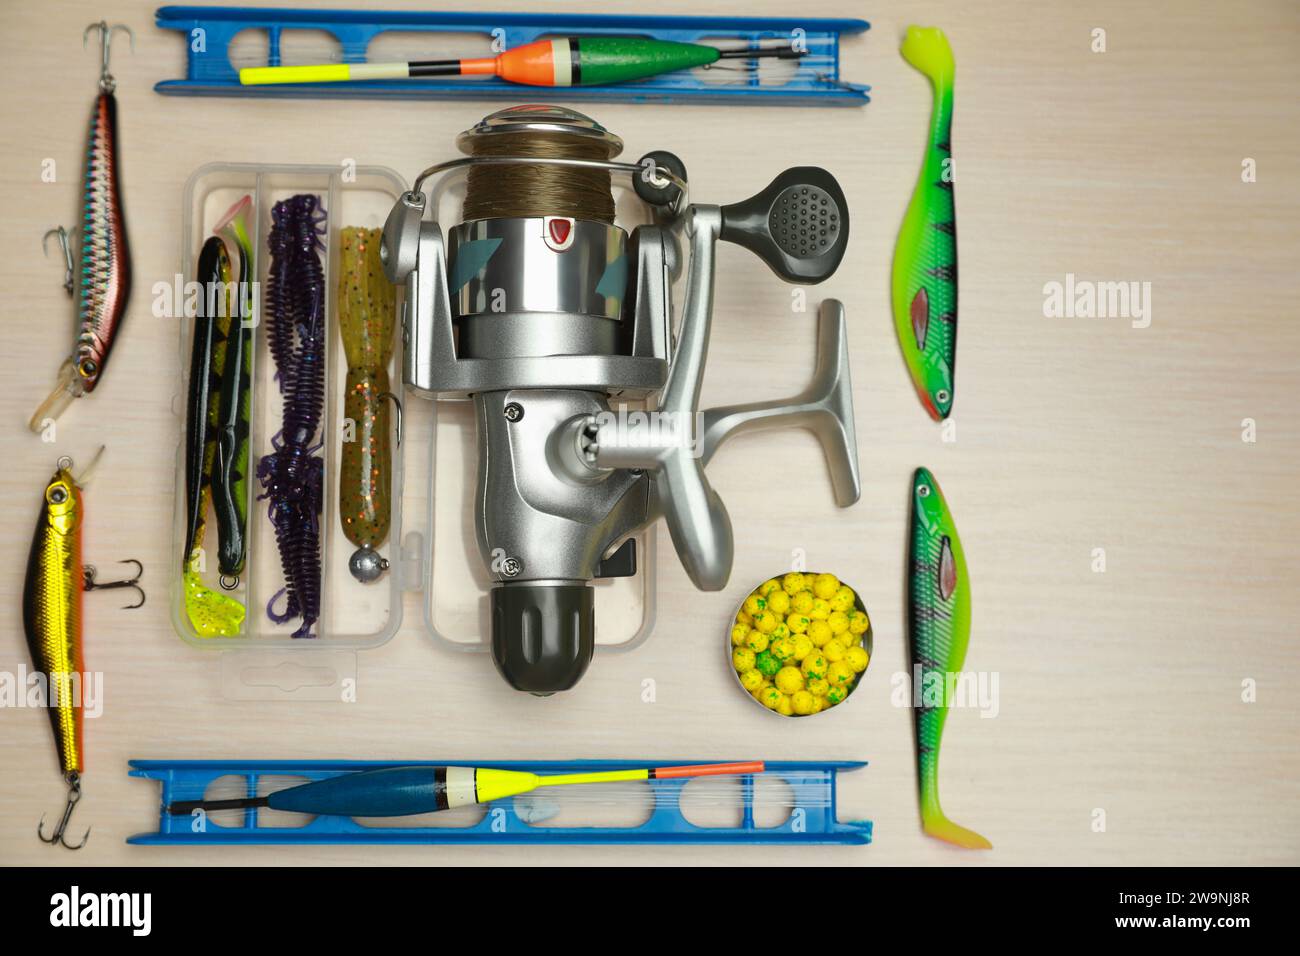 Fishing rod with a cortical handle and a fishing reel. A variety of floats.  Fishing bait from boilies and pellets. Vertical frame Stock Photo - Alamy